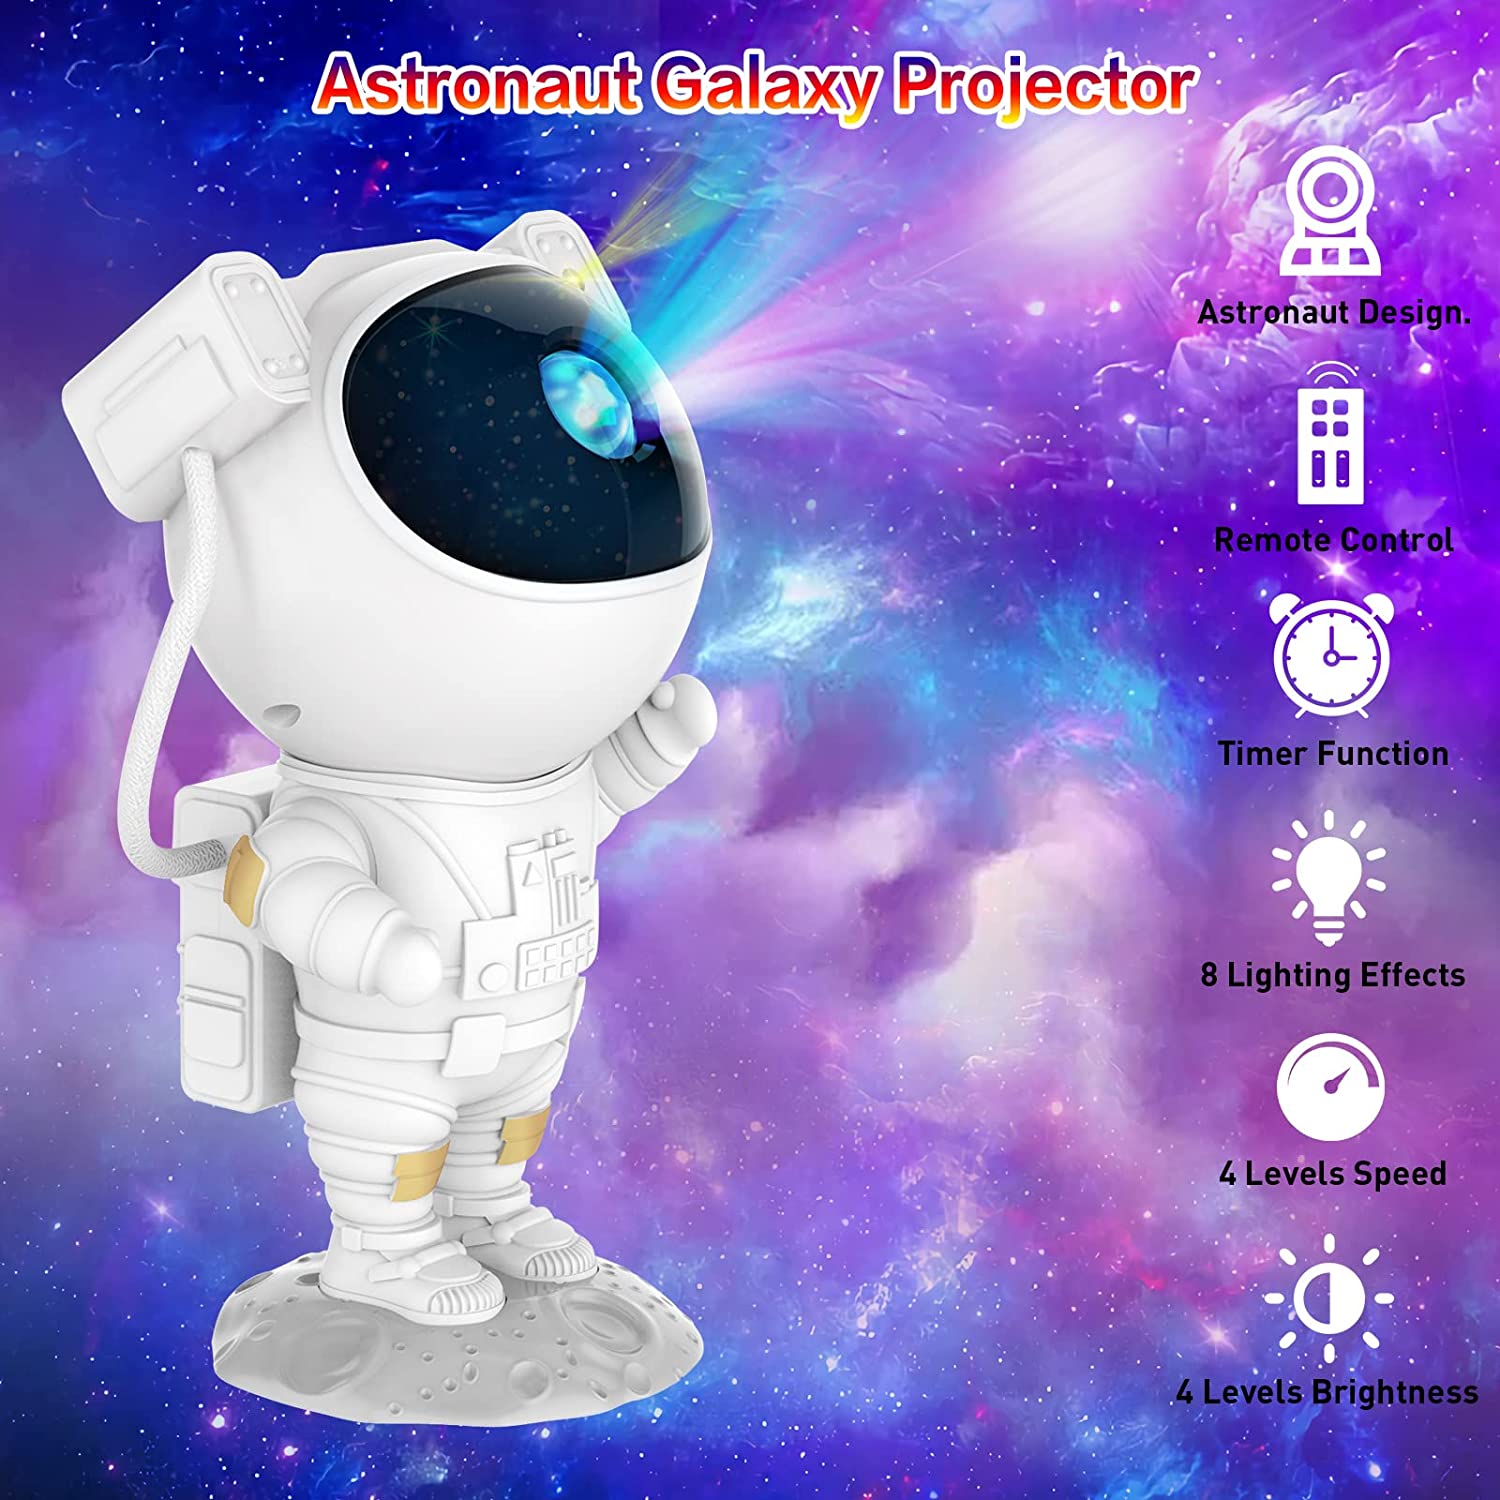 SZPACMATE Astronaut Galaxy Star Projector with Nebula, Timer & Remote Control - Bedroom & Ceiling Light Show, Perfect Gift for Kids & Adults 5